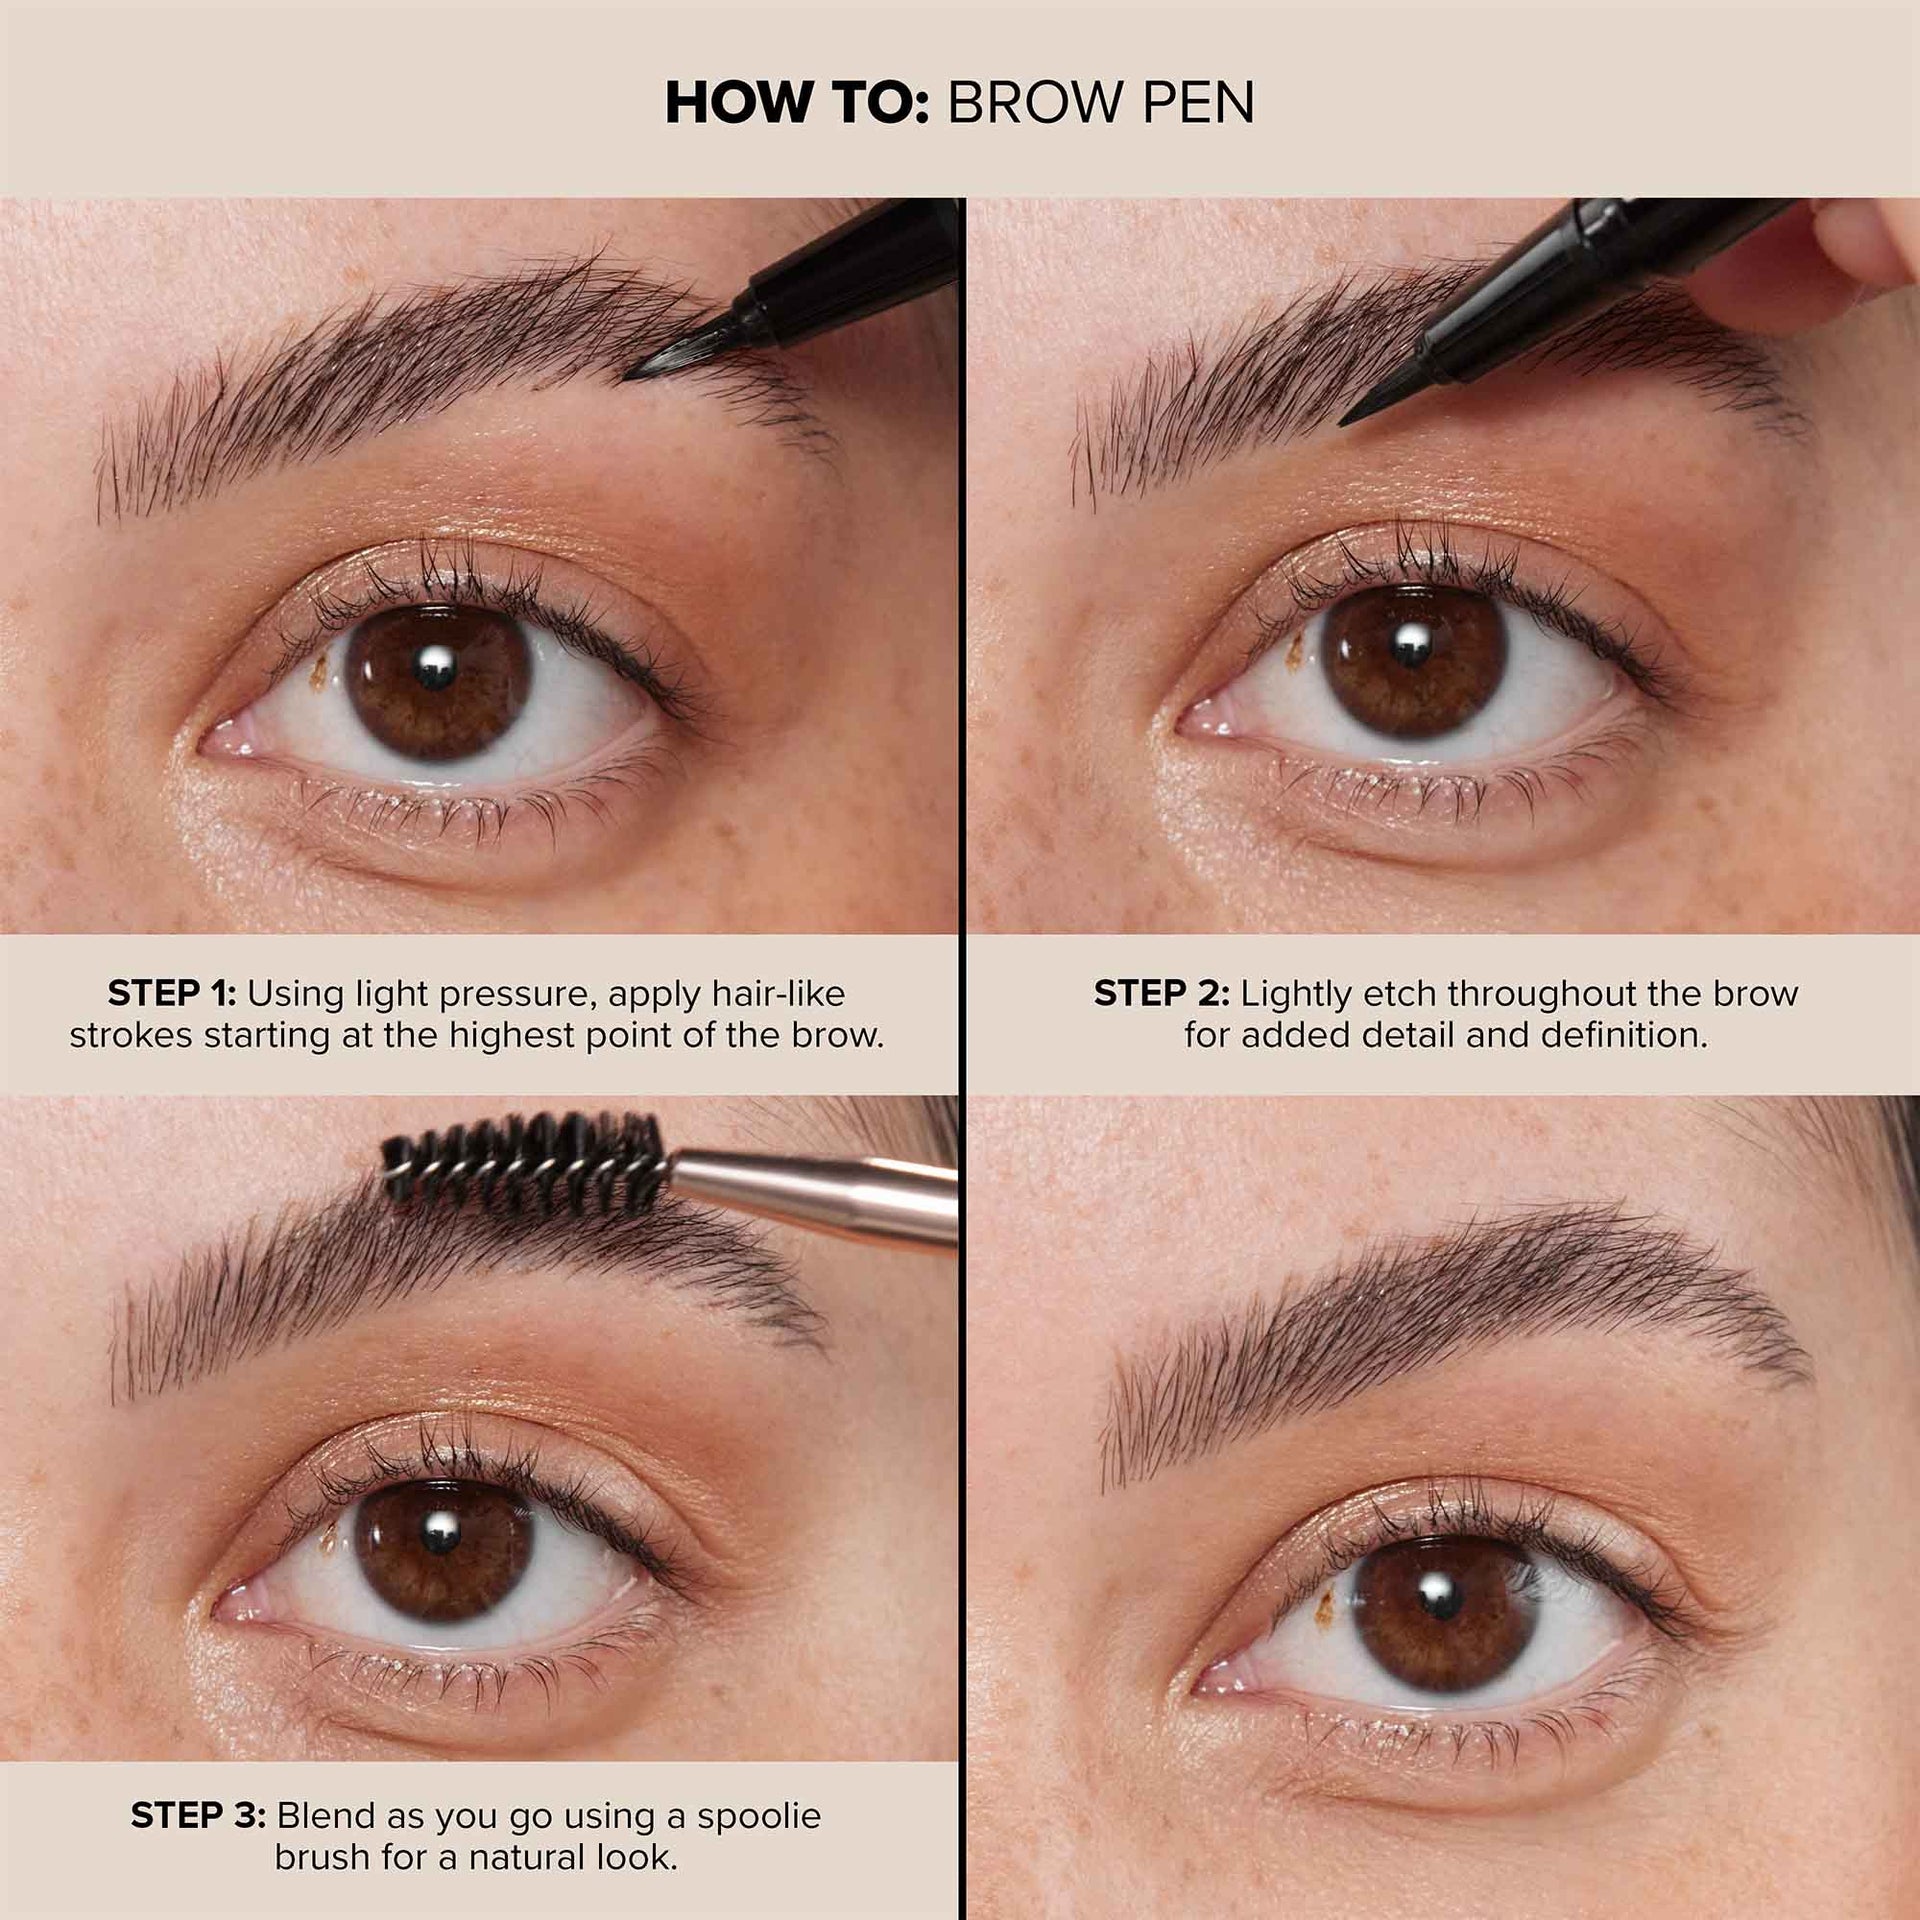 How To Brow Pen 